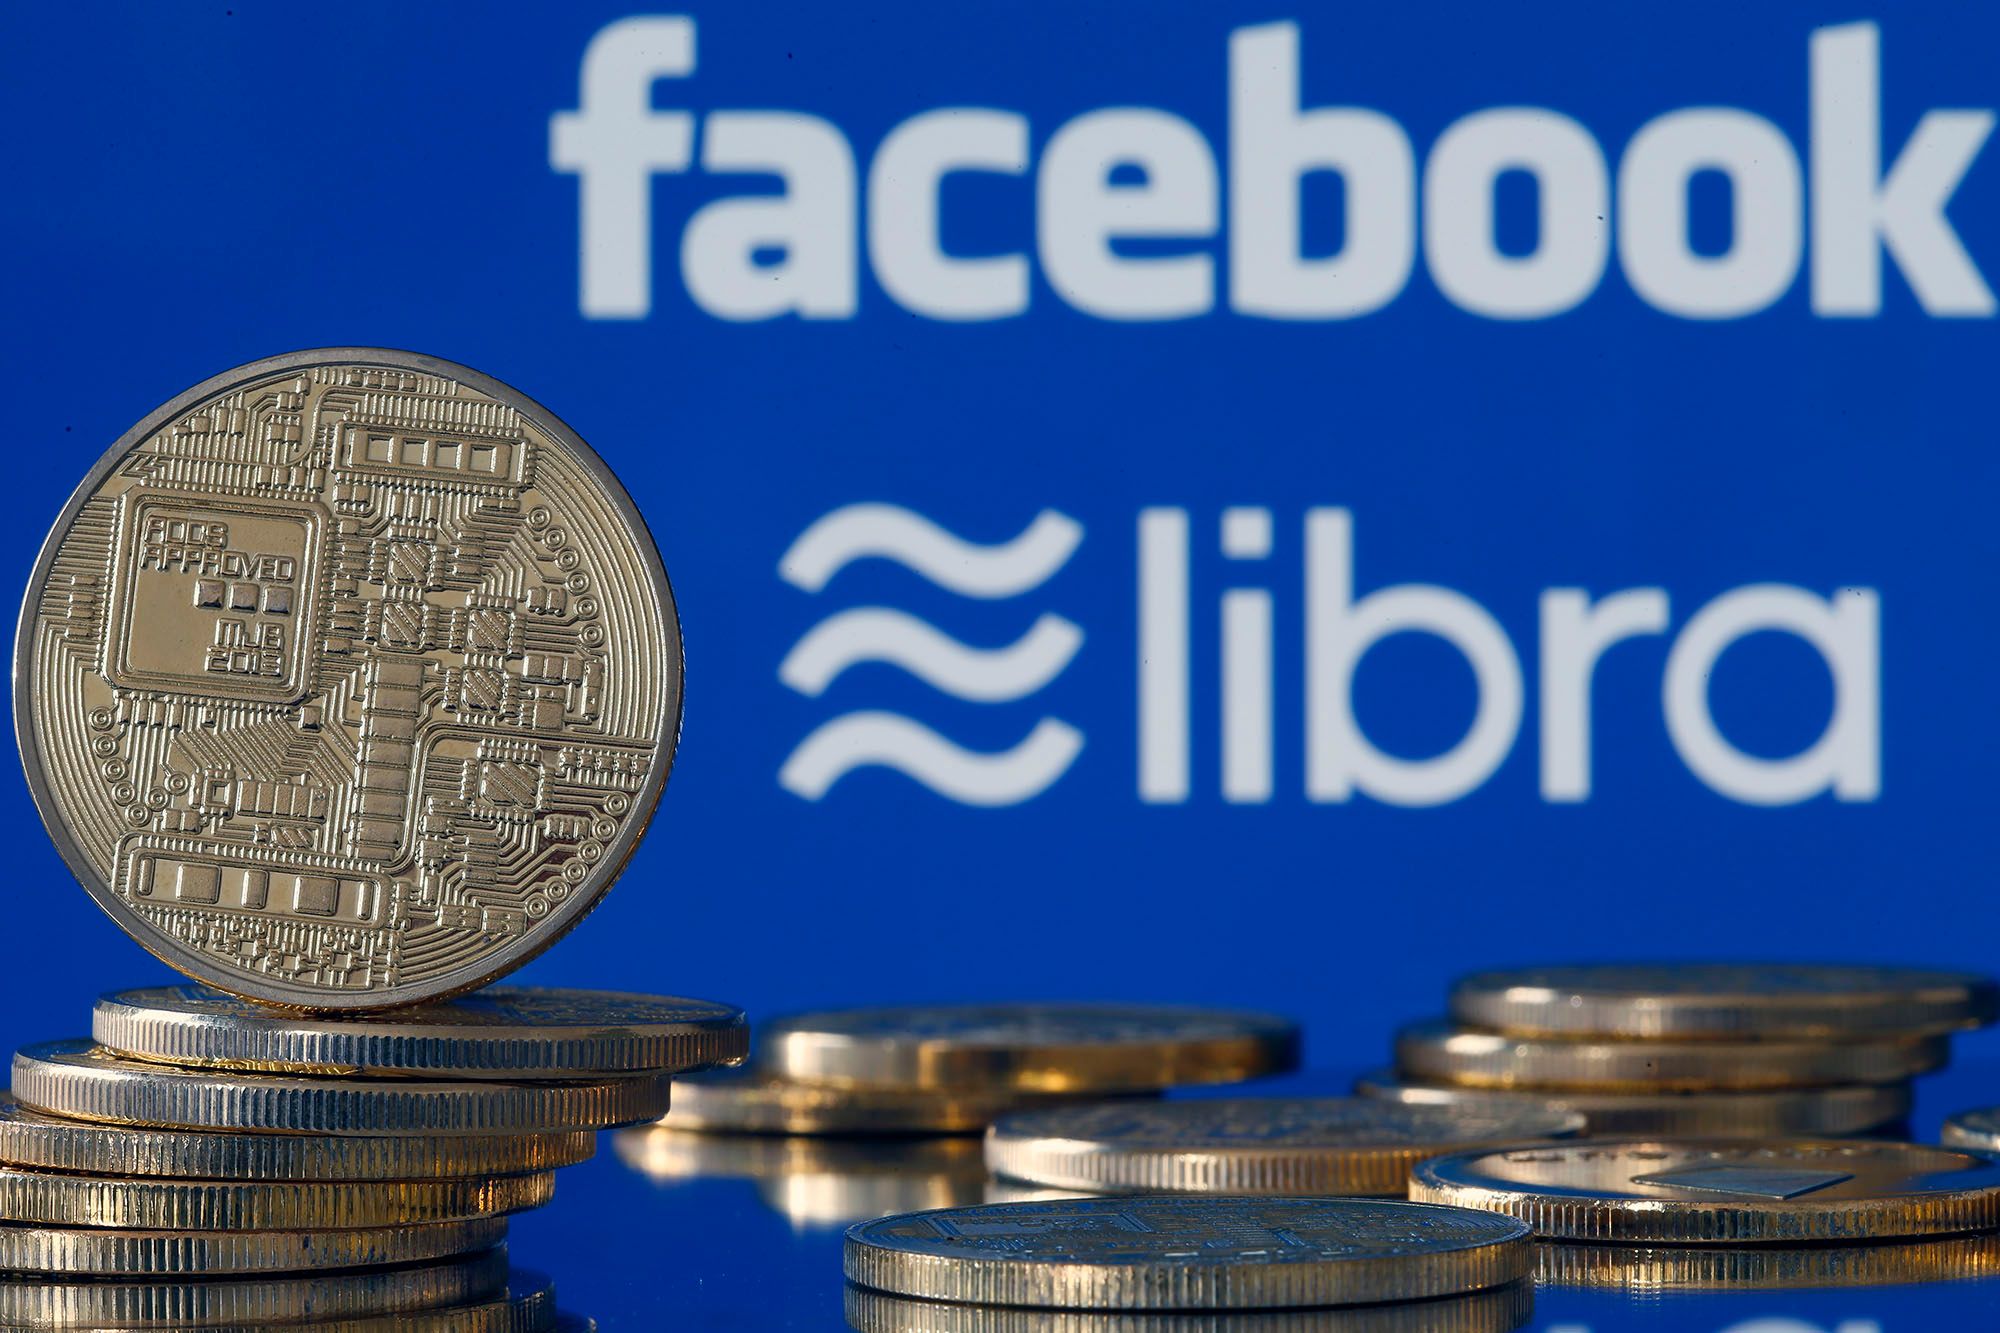 Facebook plans to produce Libra – a cryptocurrency of their own